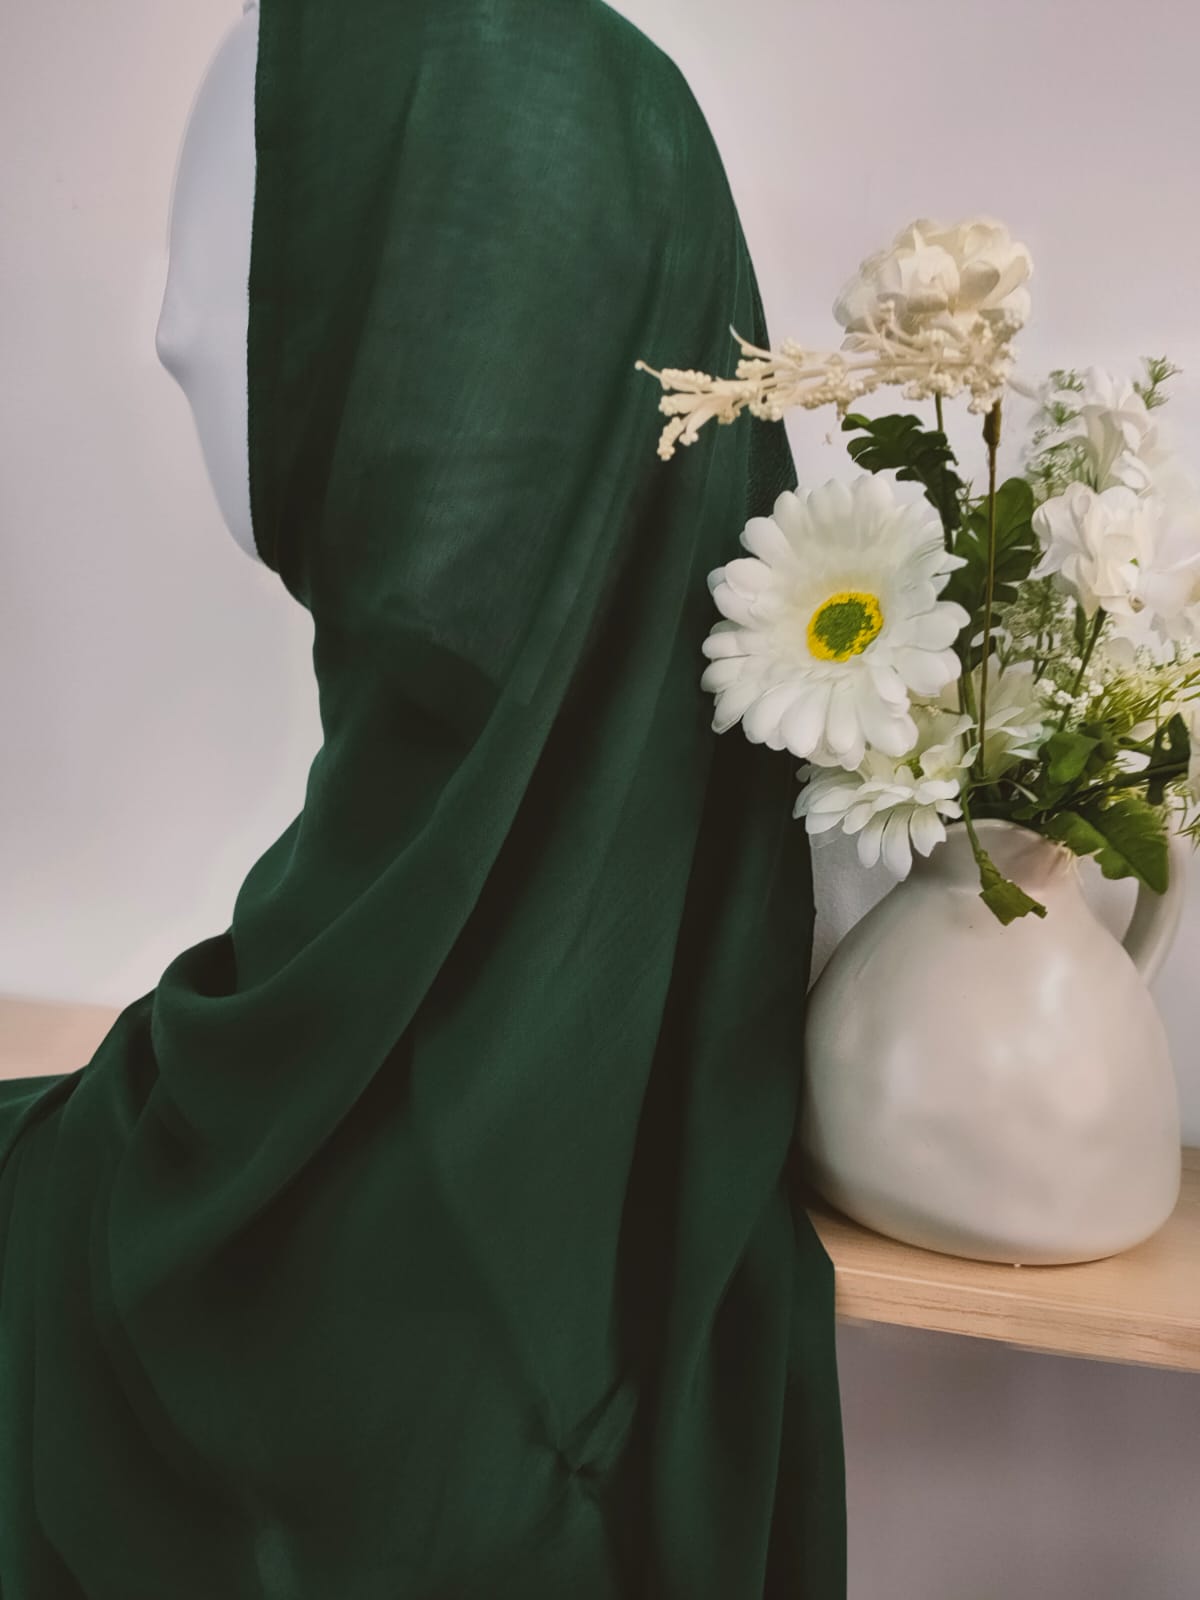 Introducing our stunning Modal Hijab in Emerald Green, a radiant addition to the wardrobe of modest women, exclusively at Hikmah Boutique! Crafted with care from premium modal fabric, gentle in touch and breathable, this modal hijab promises comfort and style that endures. Based in Australia, Deliver Worldwide.